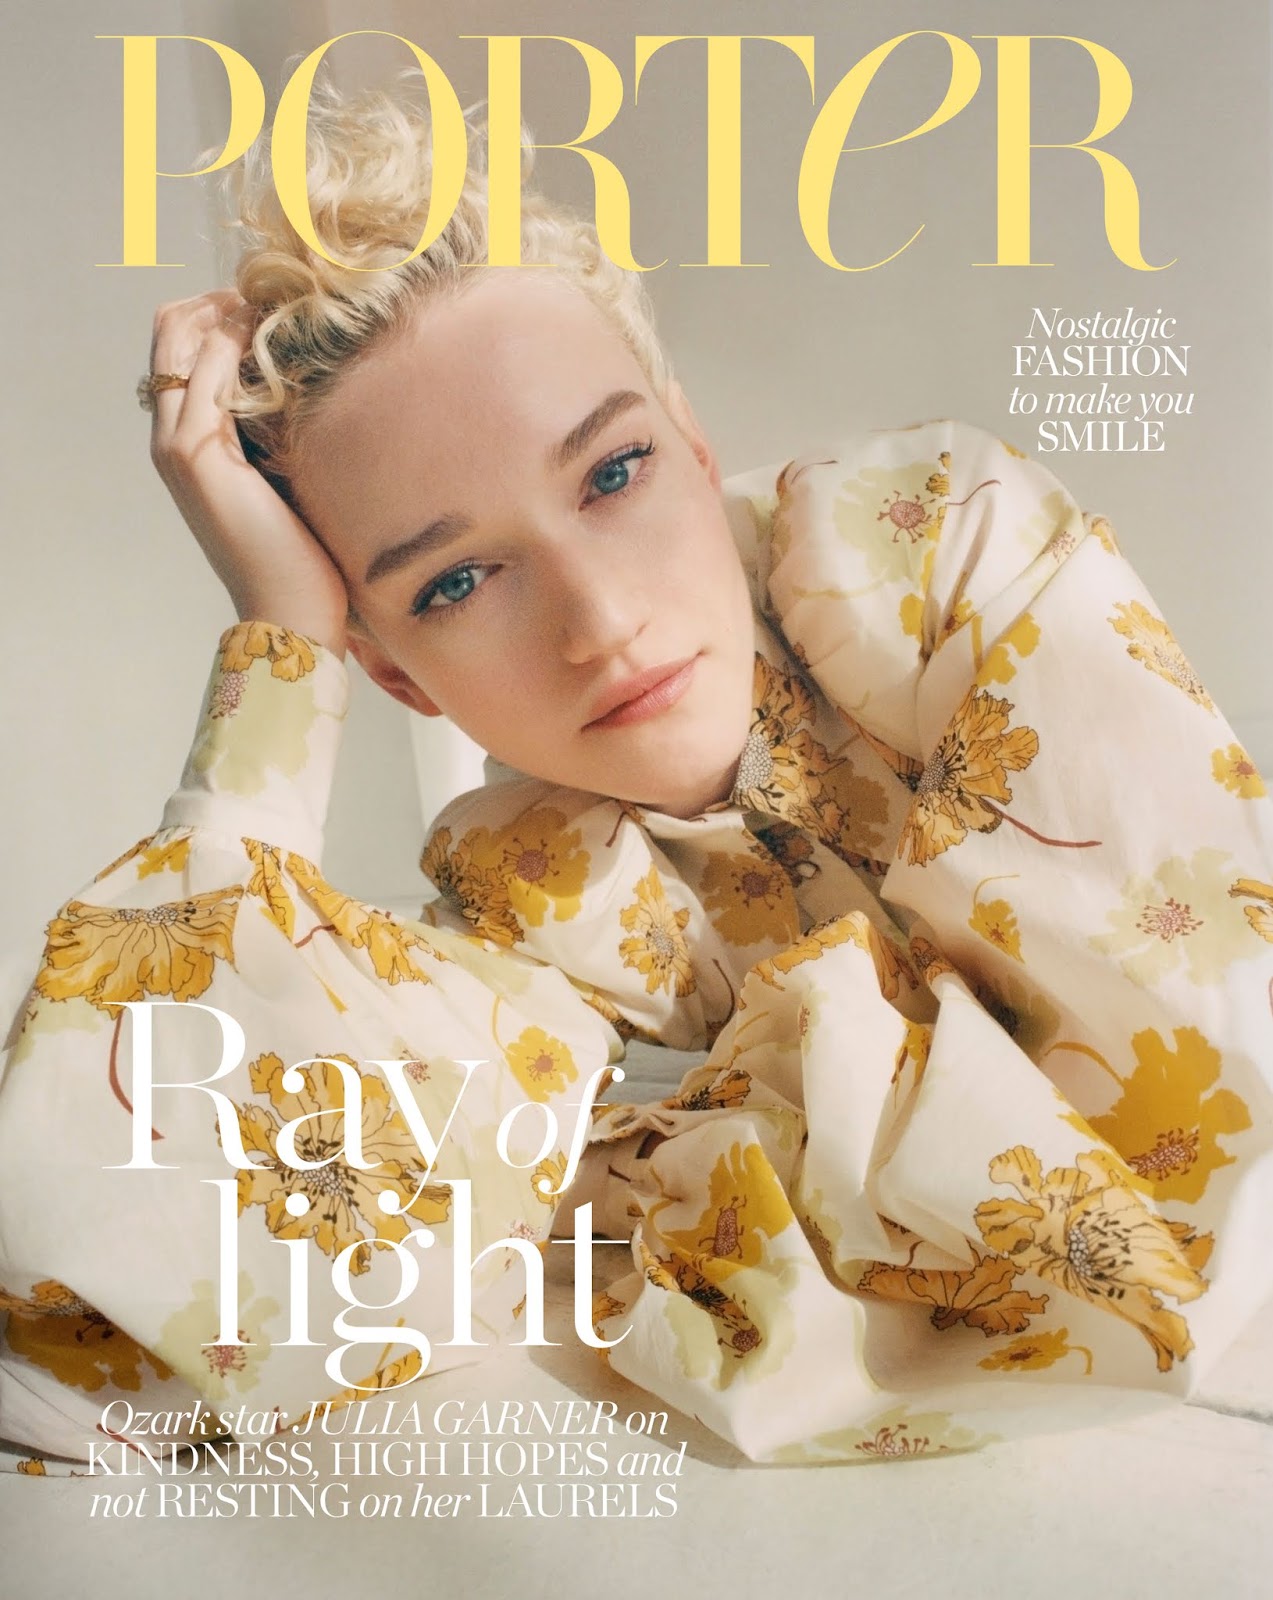 Porter Edit April 2020 Cover Story Editorial